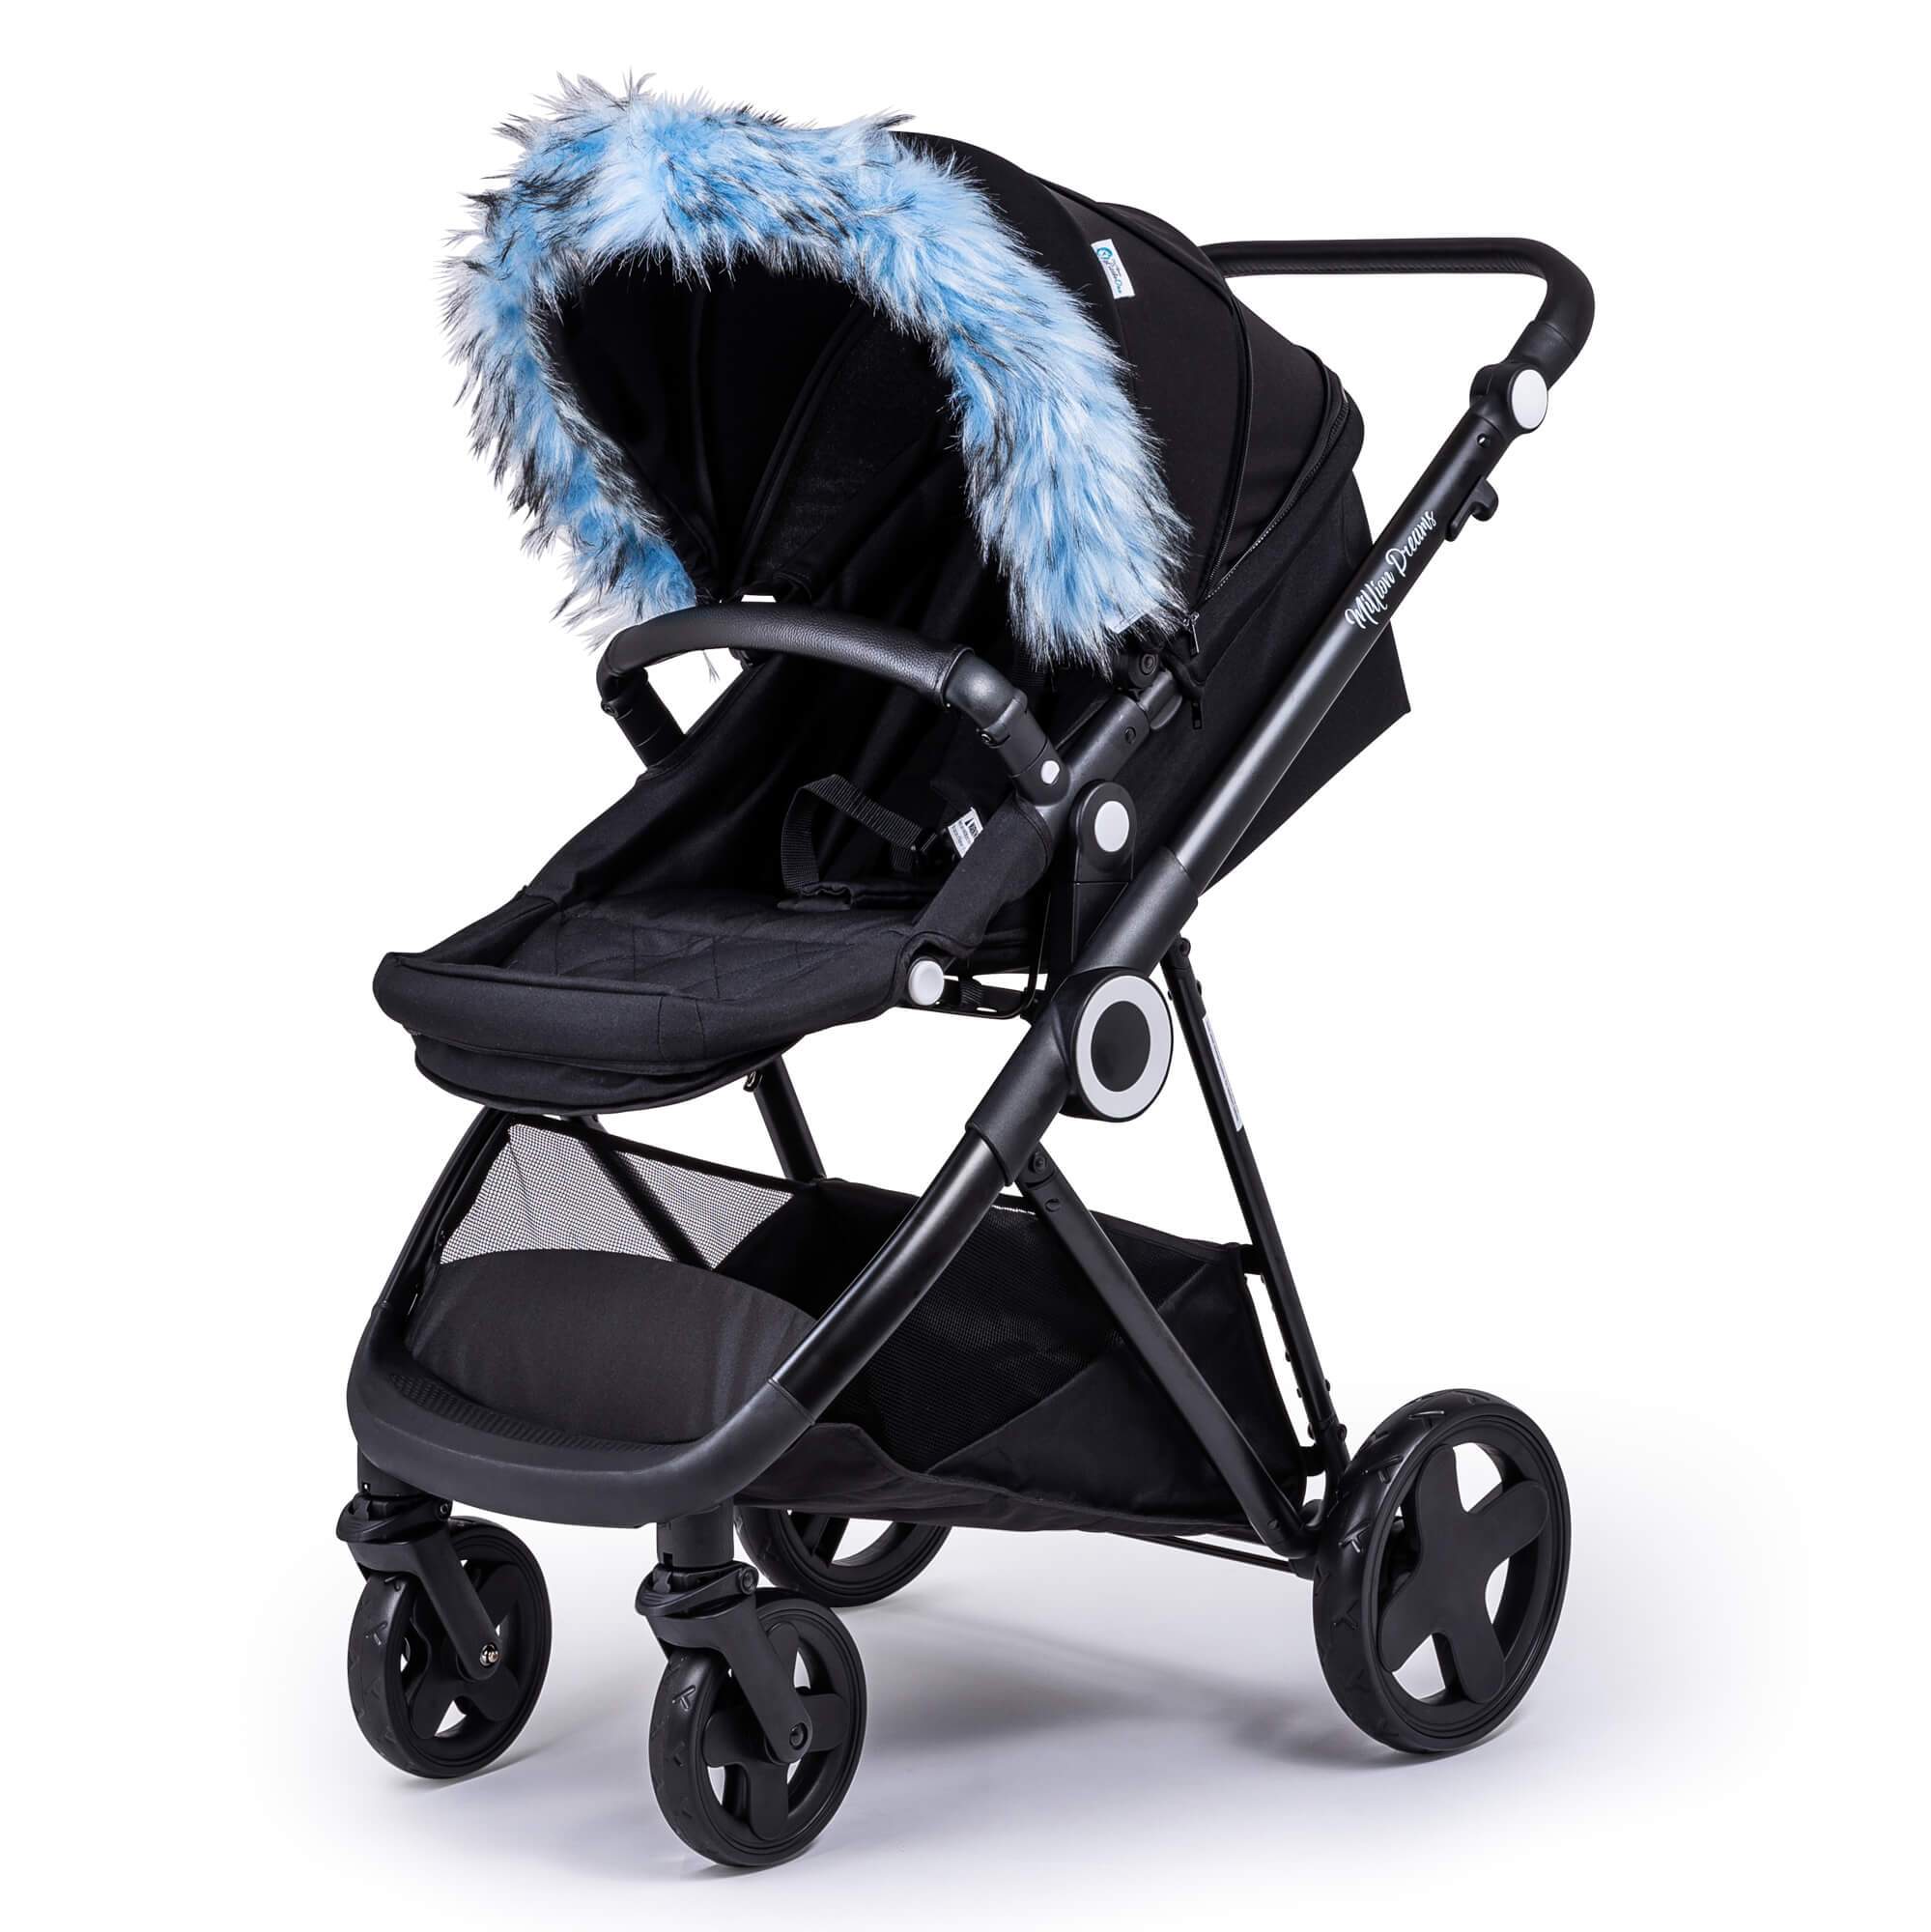 Pram Fur Hood Trim Attachment For Pushchair Compatible with Kids Kargo - Light Blue / Fits All Models | For Your Little One